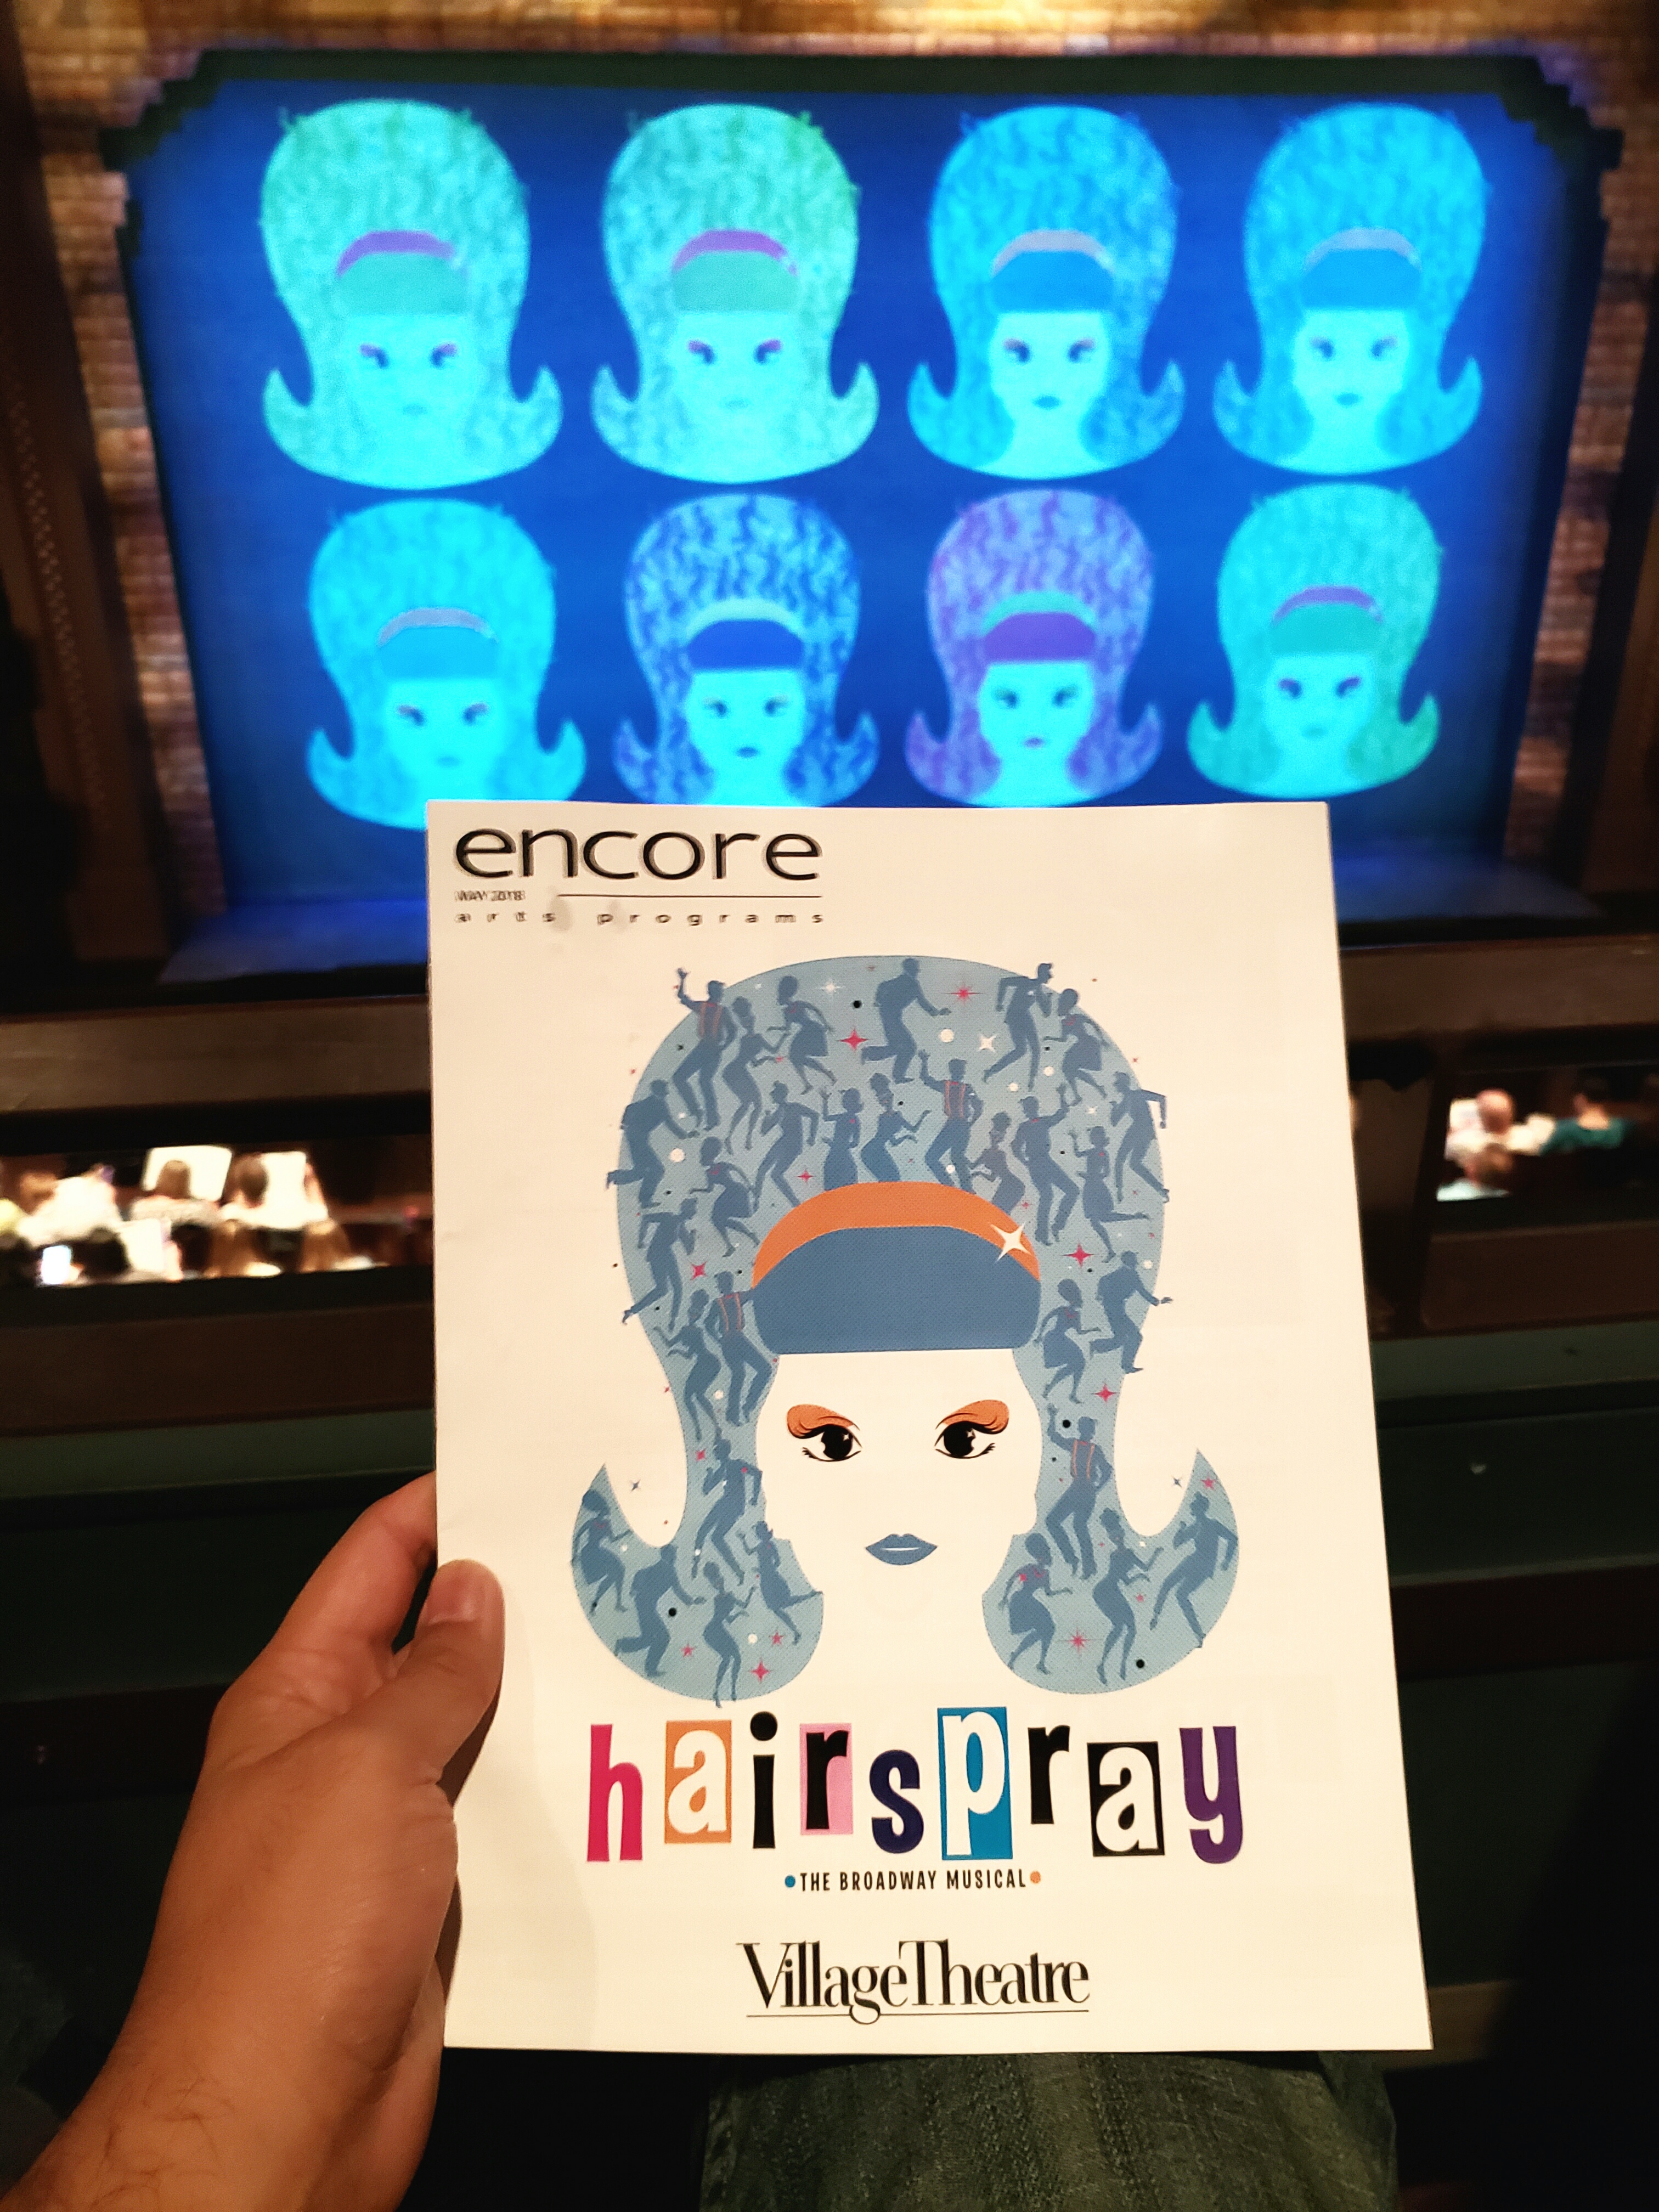 Best Hairspray version I've seen so far (out of 5). Will probably see again. It was interesting to hear Tracy with a more full-bodied (no pun intended) non-squeaky voice. Wish they could add the movie's songs 